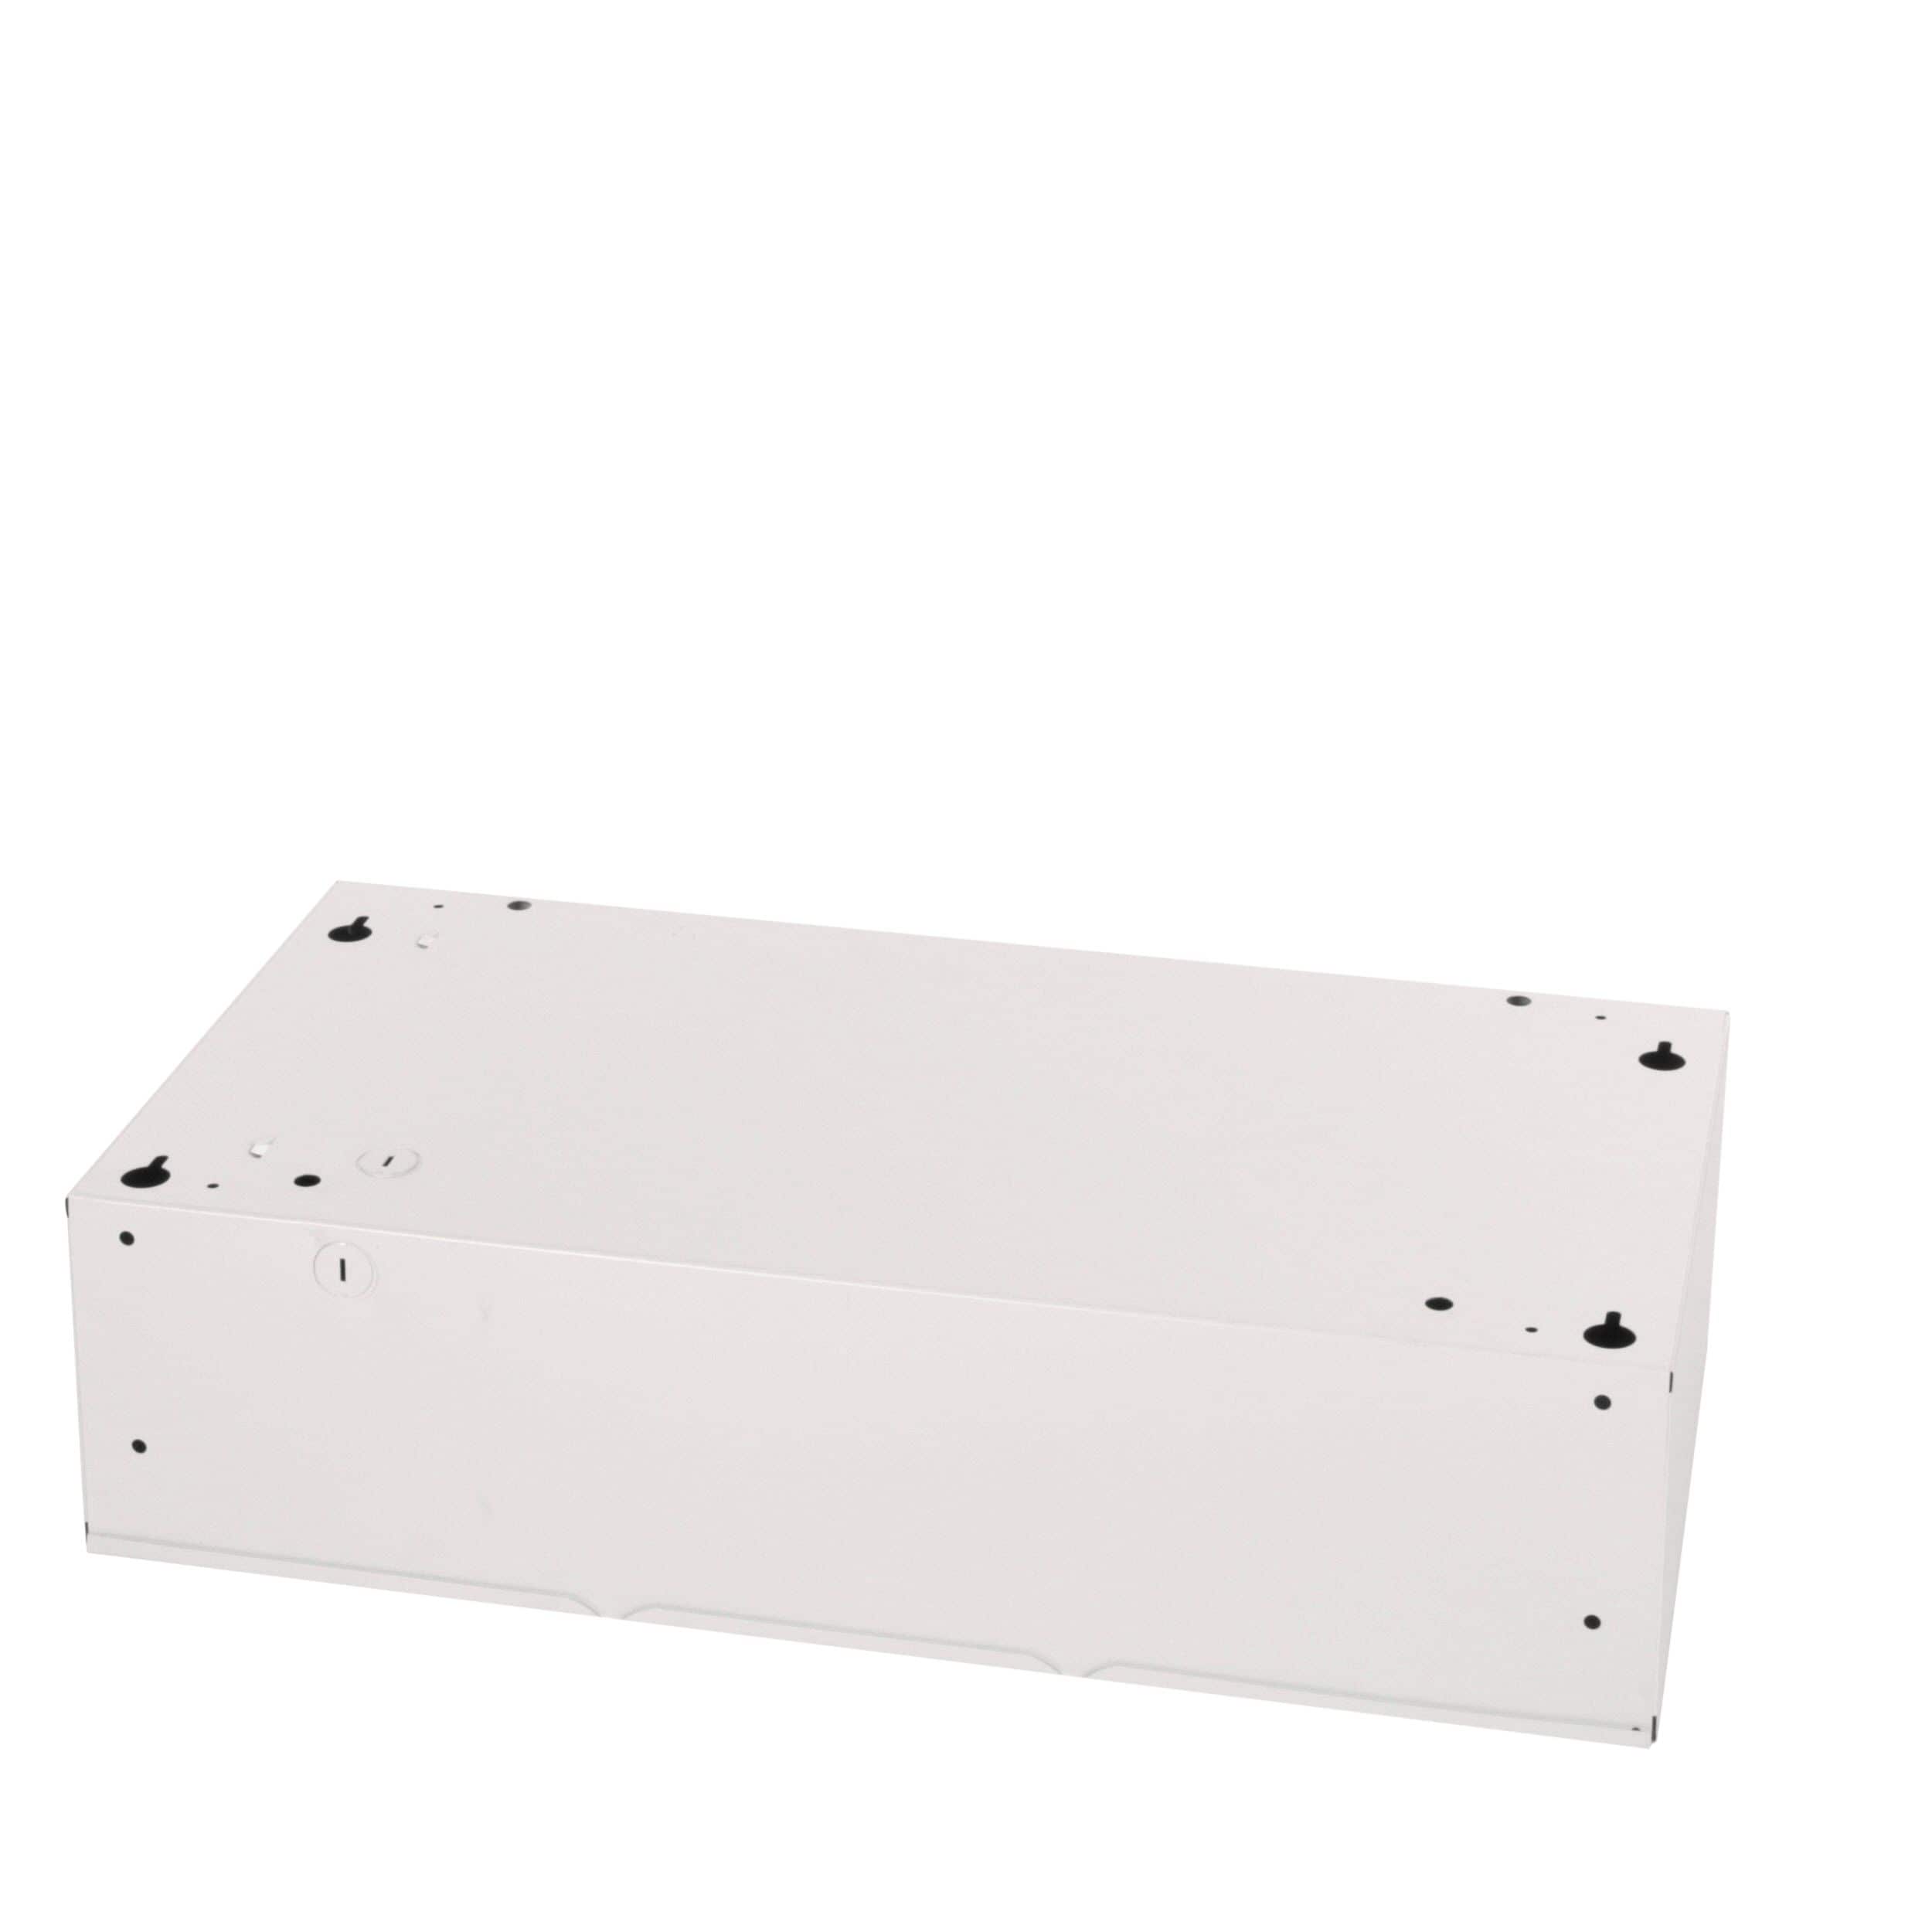 Broan-Nutone 41000 Series 24 In. Non-Ducted White Range Hood - Valu Home  Centers